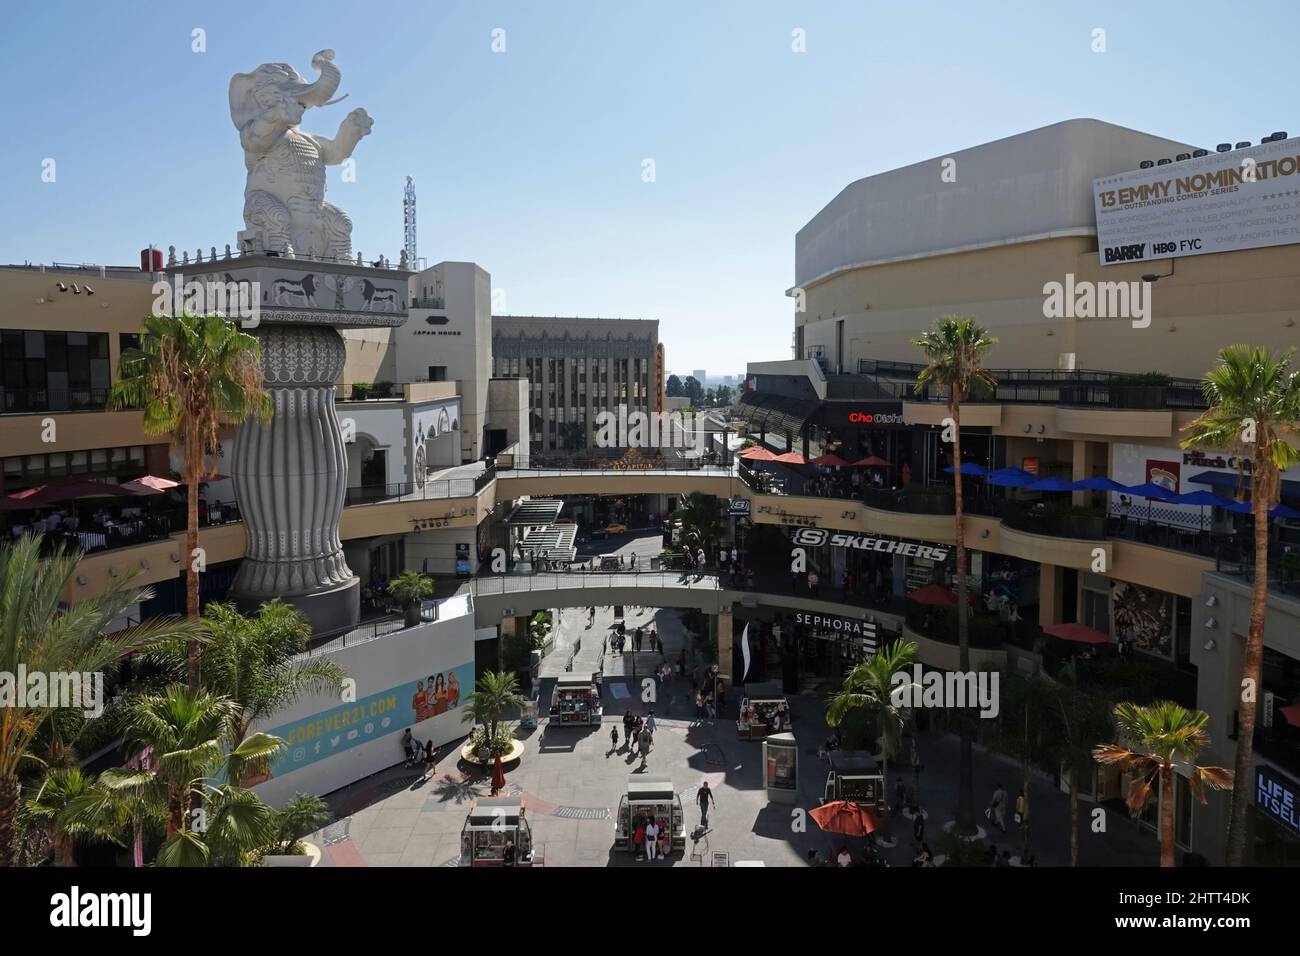 Los Angeles, CA / USA - Sept. 29, 2018: Ovation Hollywood - a shopping complex better known as Hollywood and Highland - is shown during the day. Stock Photo